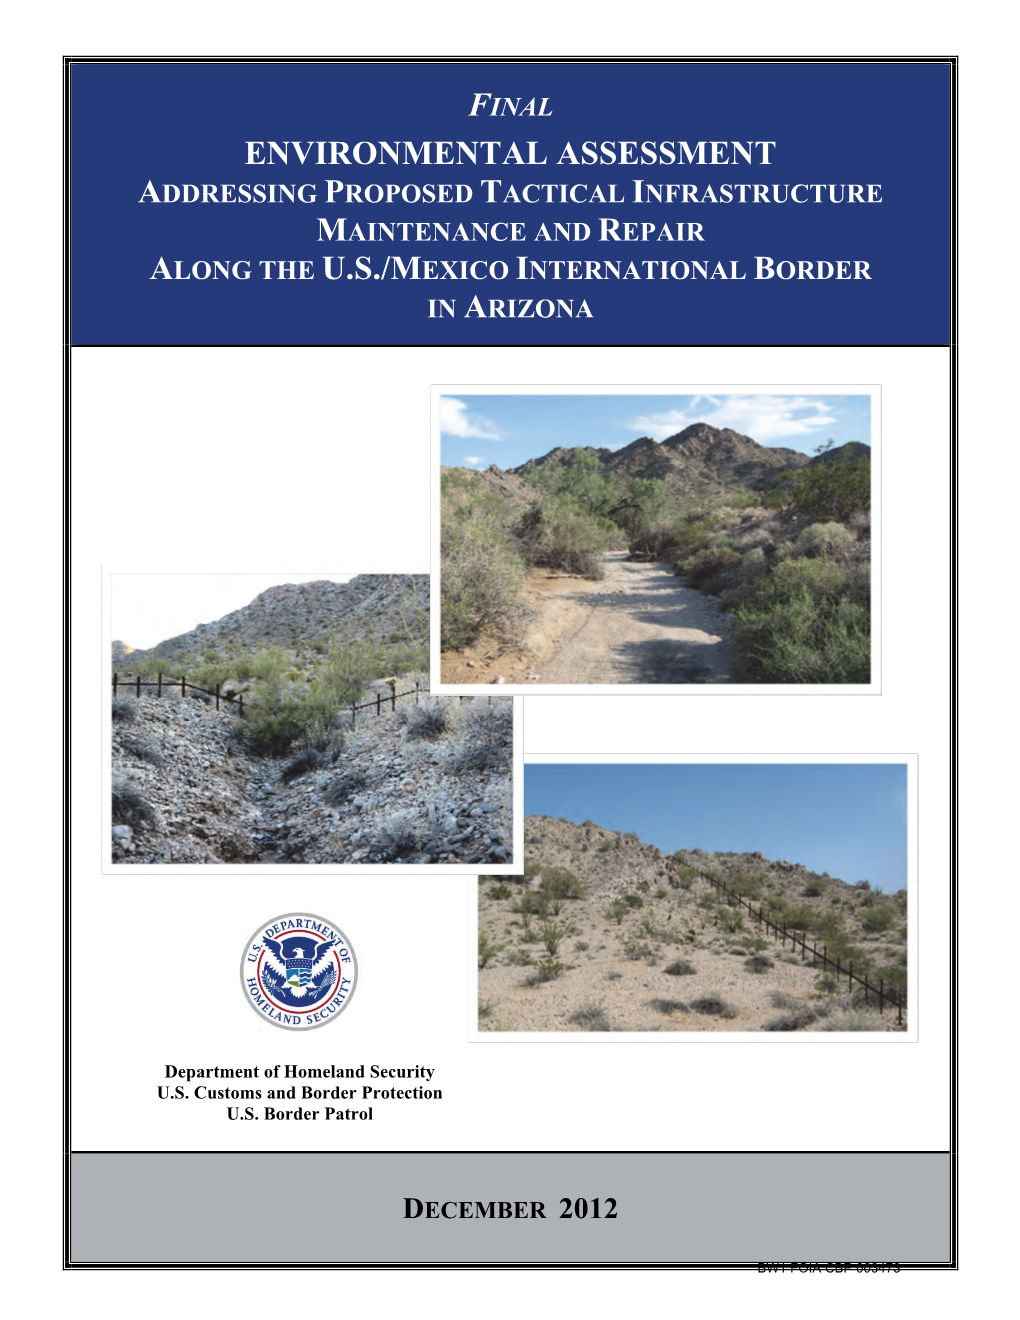 Environmental Assessment Addressing Proposed Tactical Infrastructure Maintenance and Repair Along the U.S./Mexico International Border in Arizona